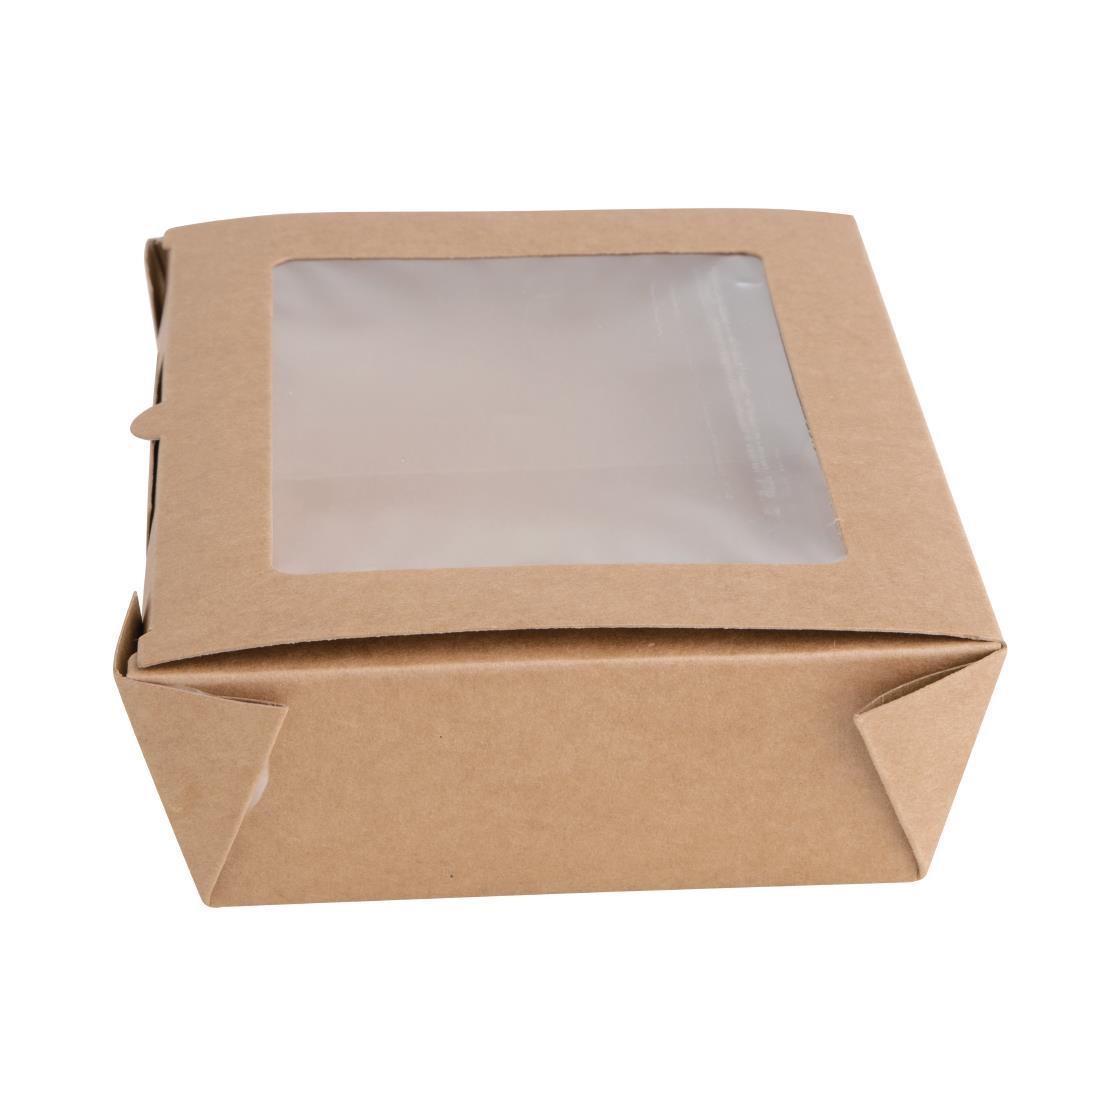 Fiesta Compostable Salad Boxes with PLA Windows 700ml (Pack of 200) - FB676  - 3